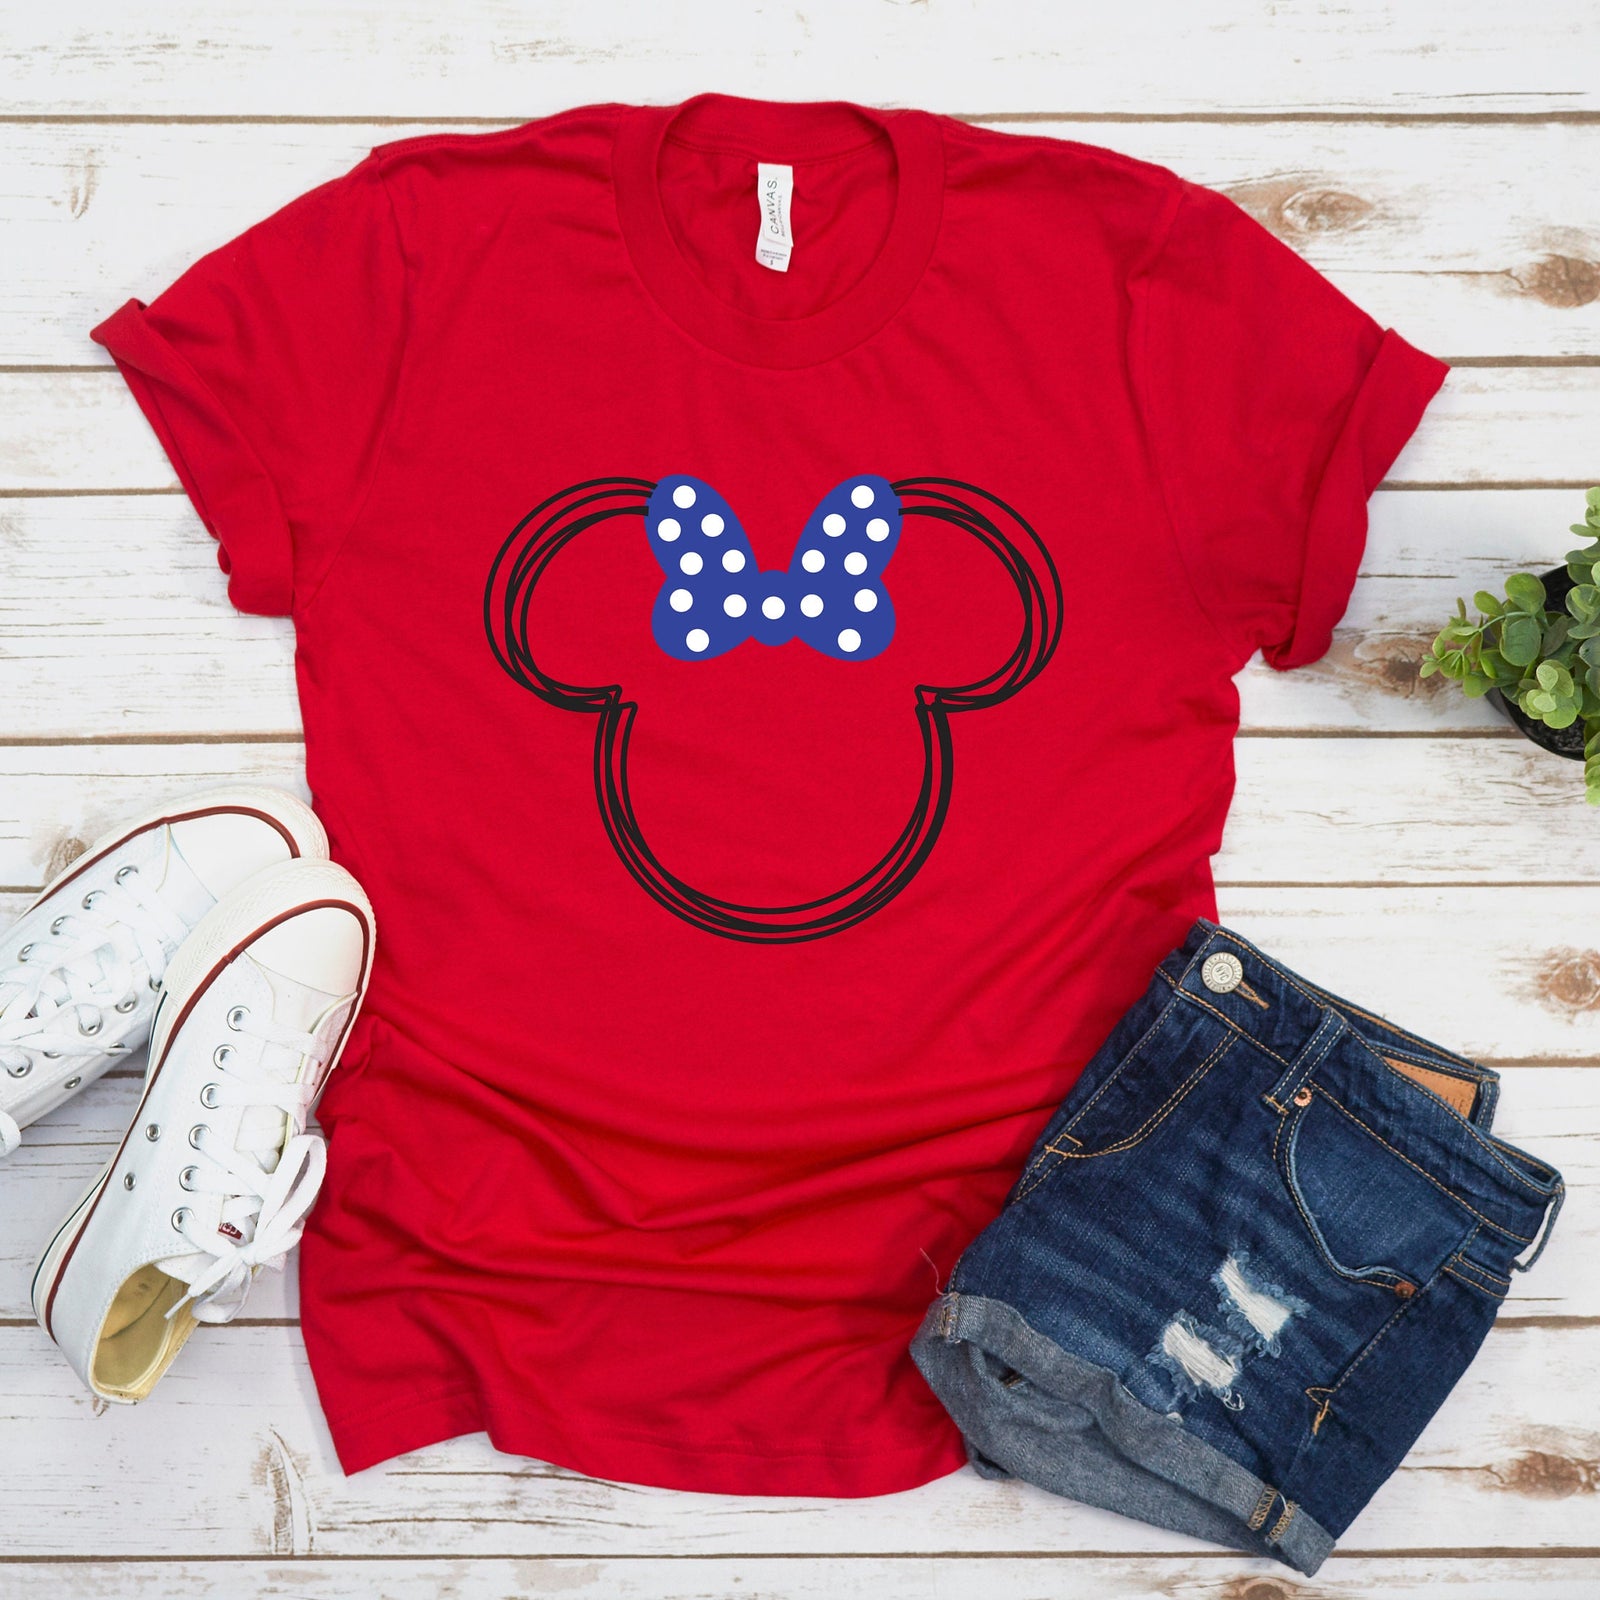 Red White and Blue Scribble Minnie Polka Dot Bow T Shirt- Patriotic- Fourth of July - Memorial - Family Disney Matching